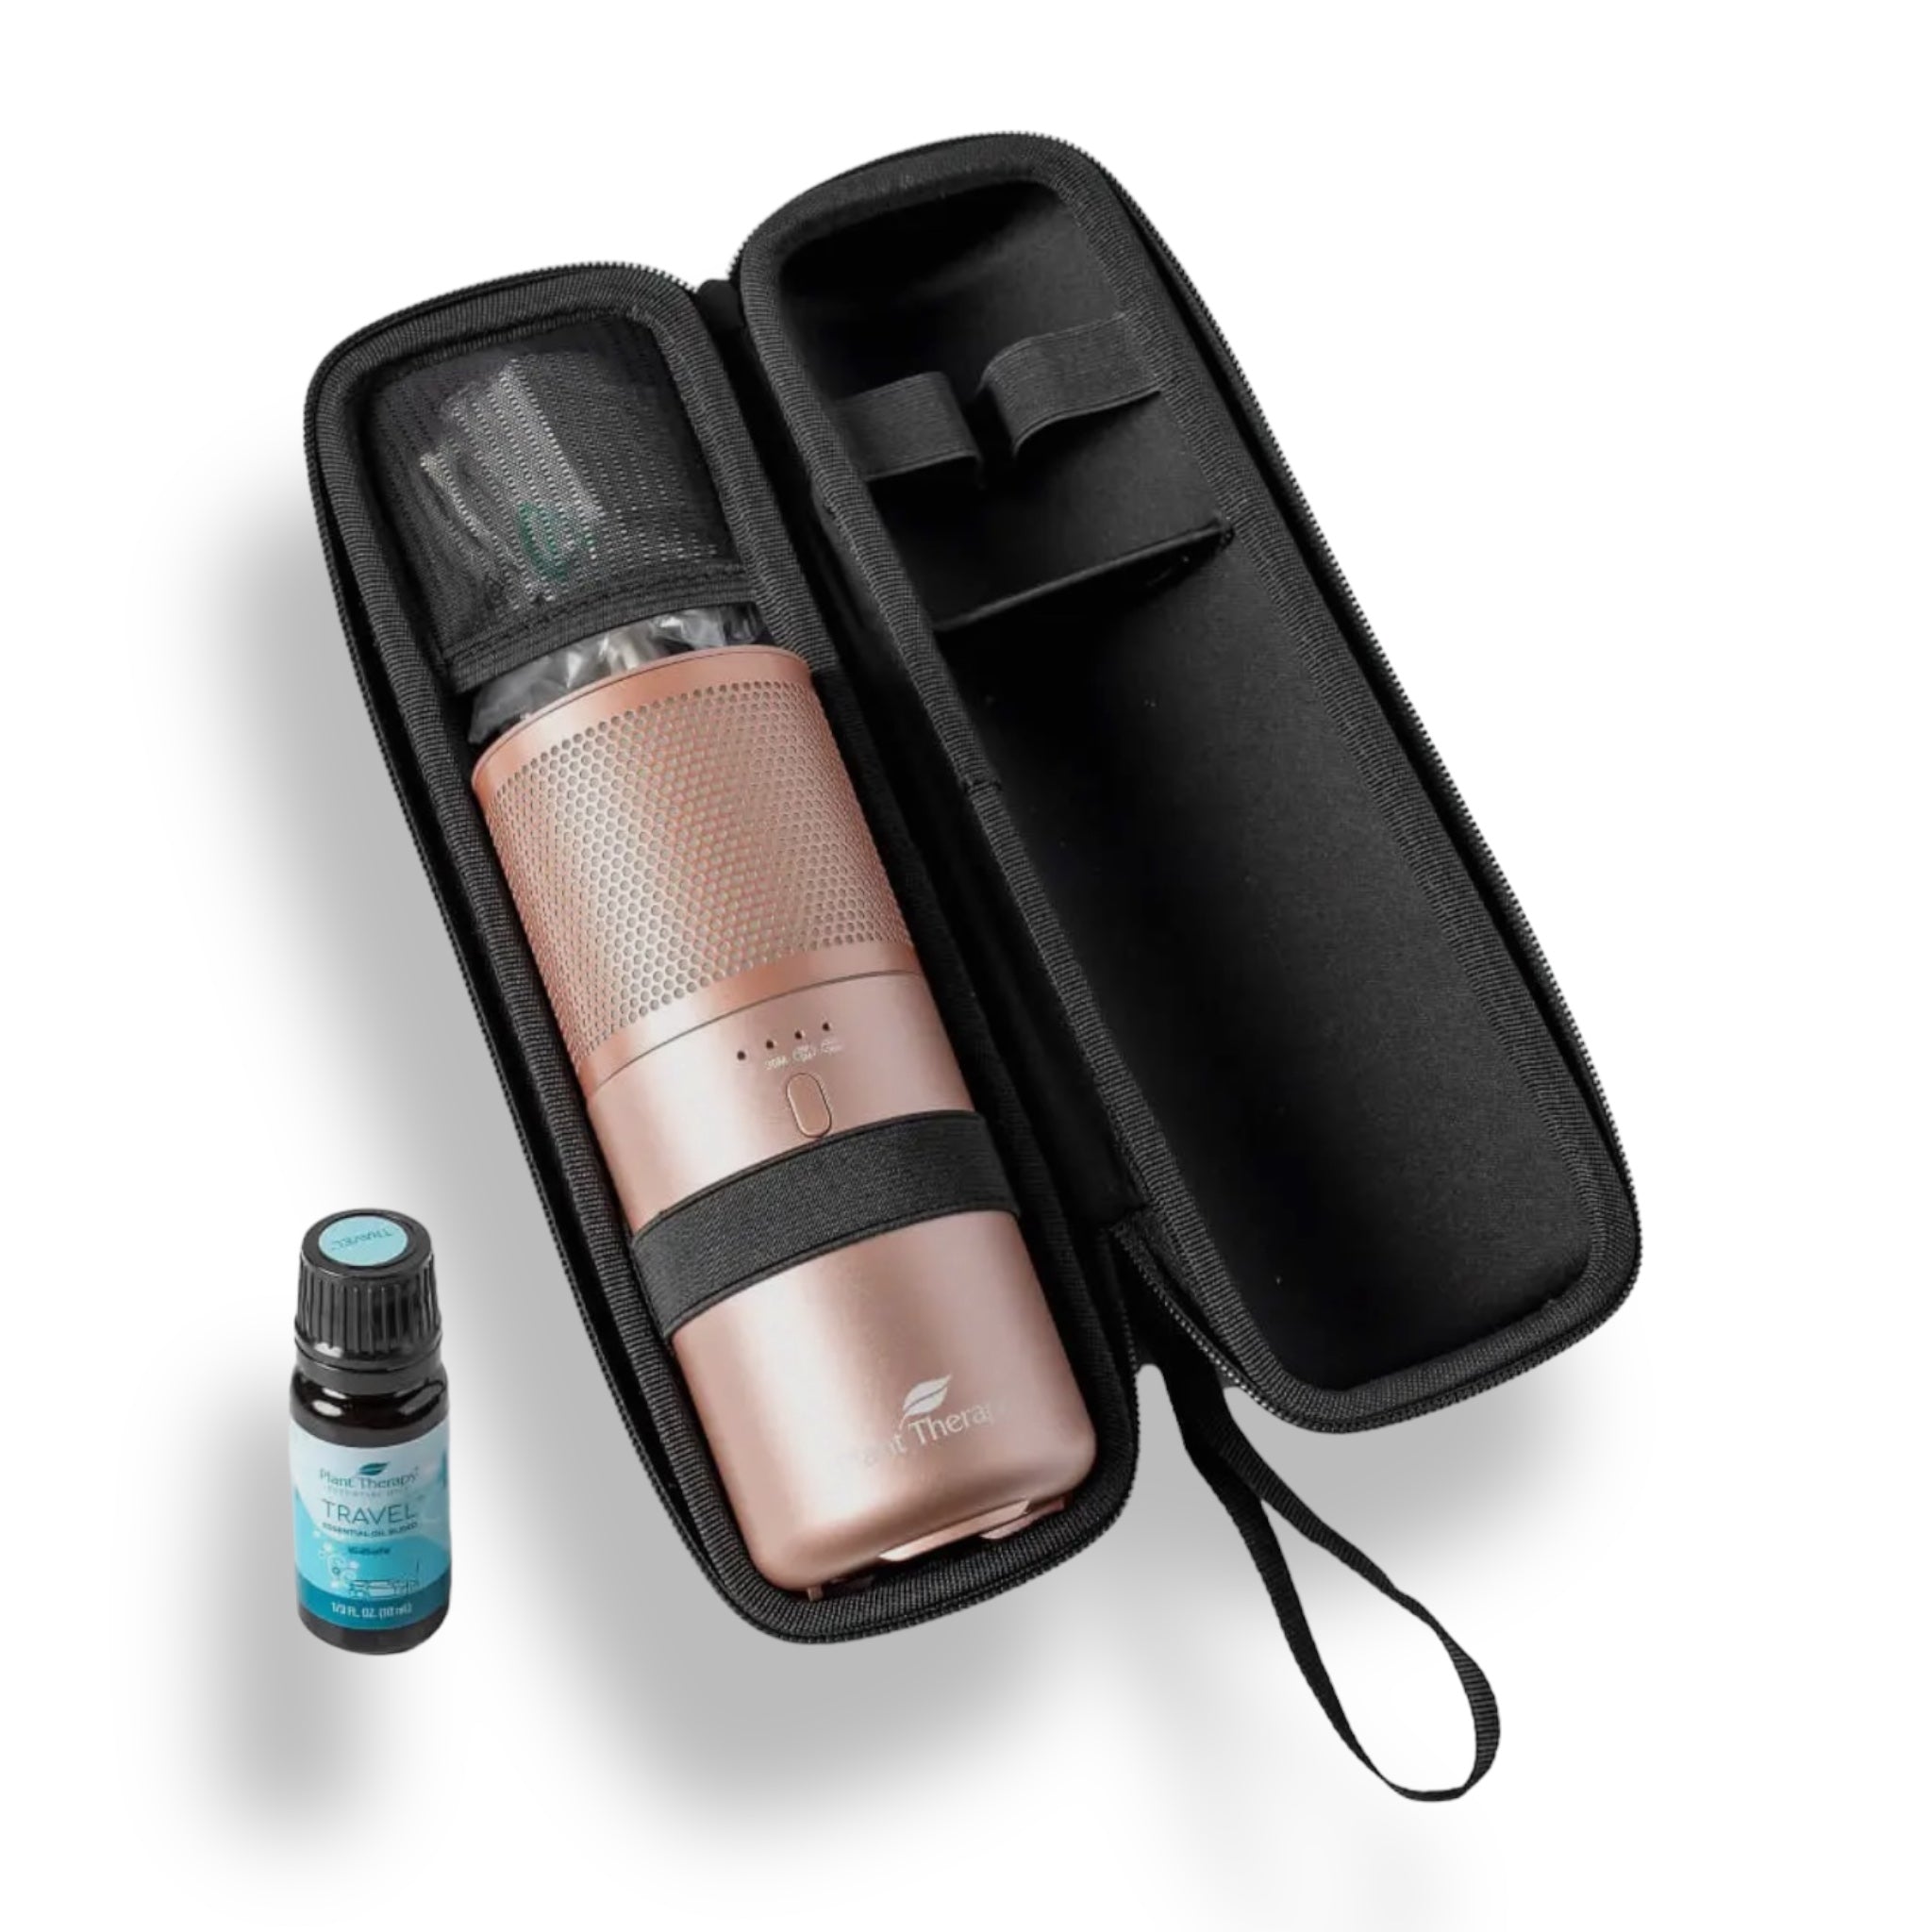 Portable Essential Oil Diffuser W/Travel Pack - Plant Therapy